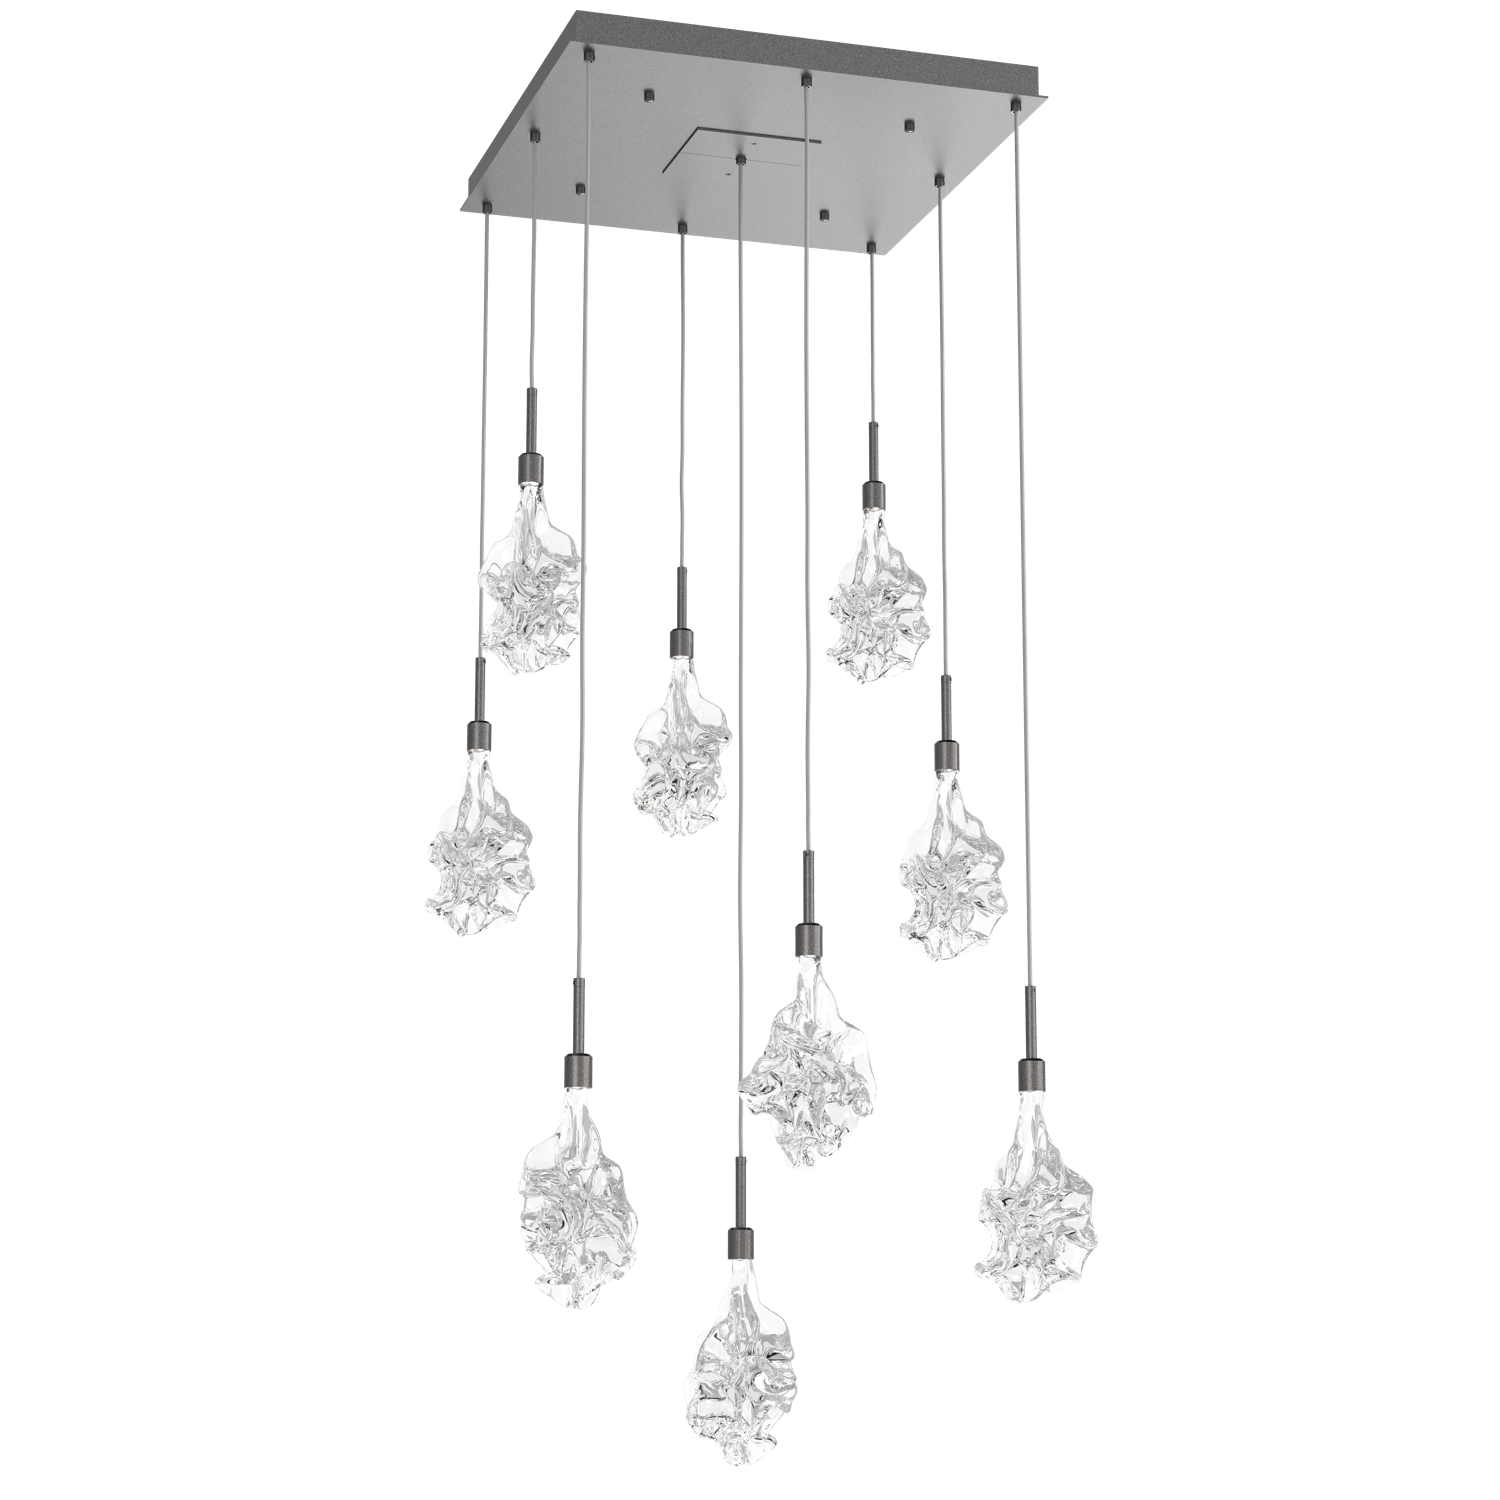 CHB0059-09-GP-Hammerton-Studio-Blossom-9-light-square-pendant-chandelier-with-graphite-finish-and-clear-handblown-crystal-glass-shades-and-LED-lamping